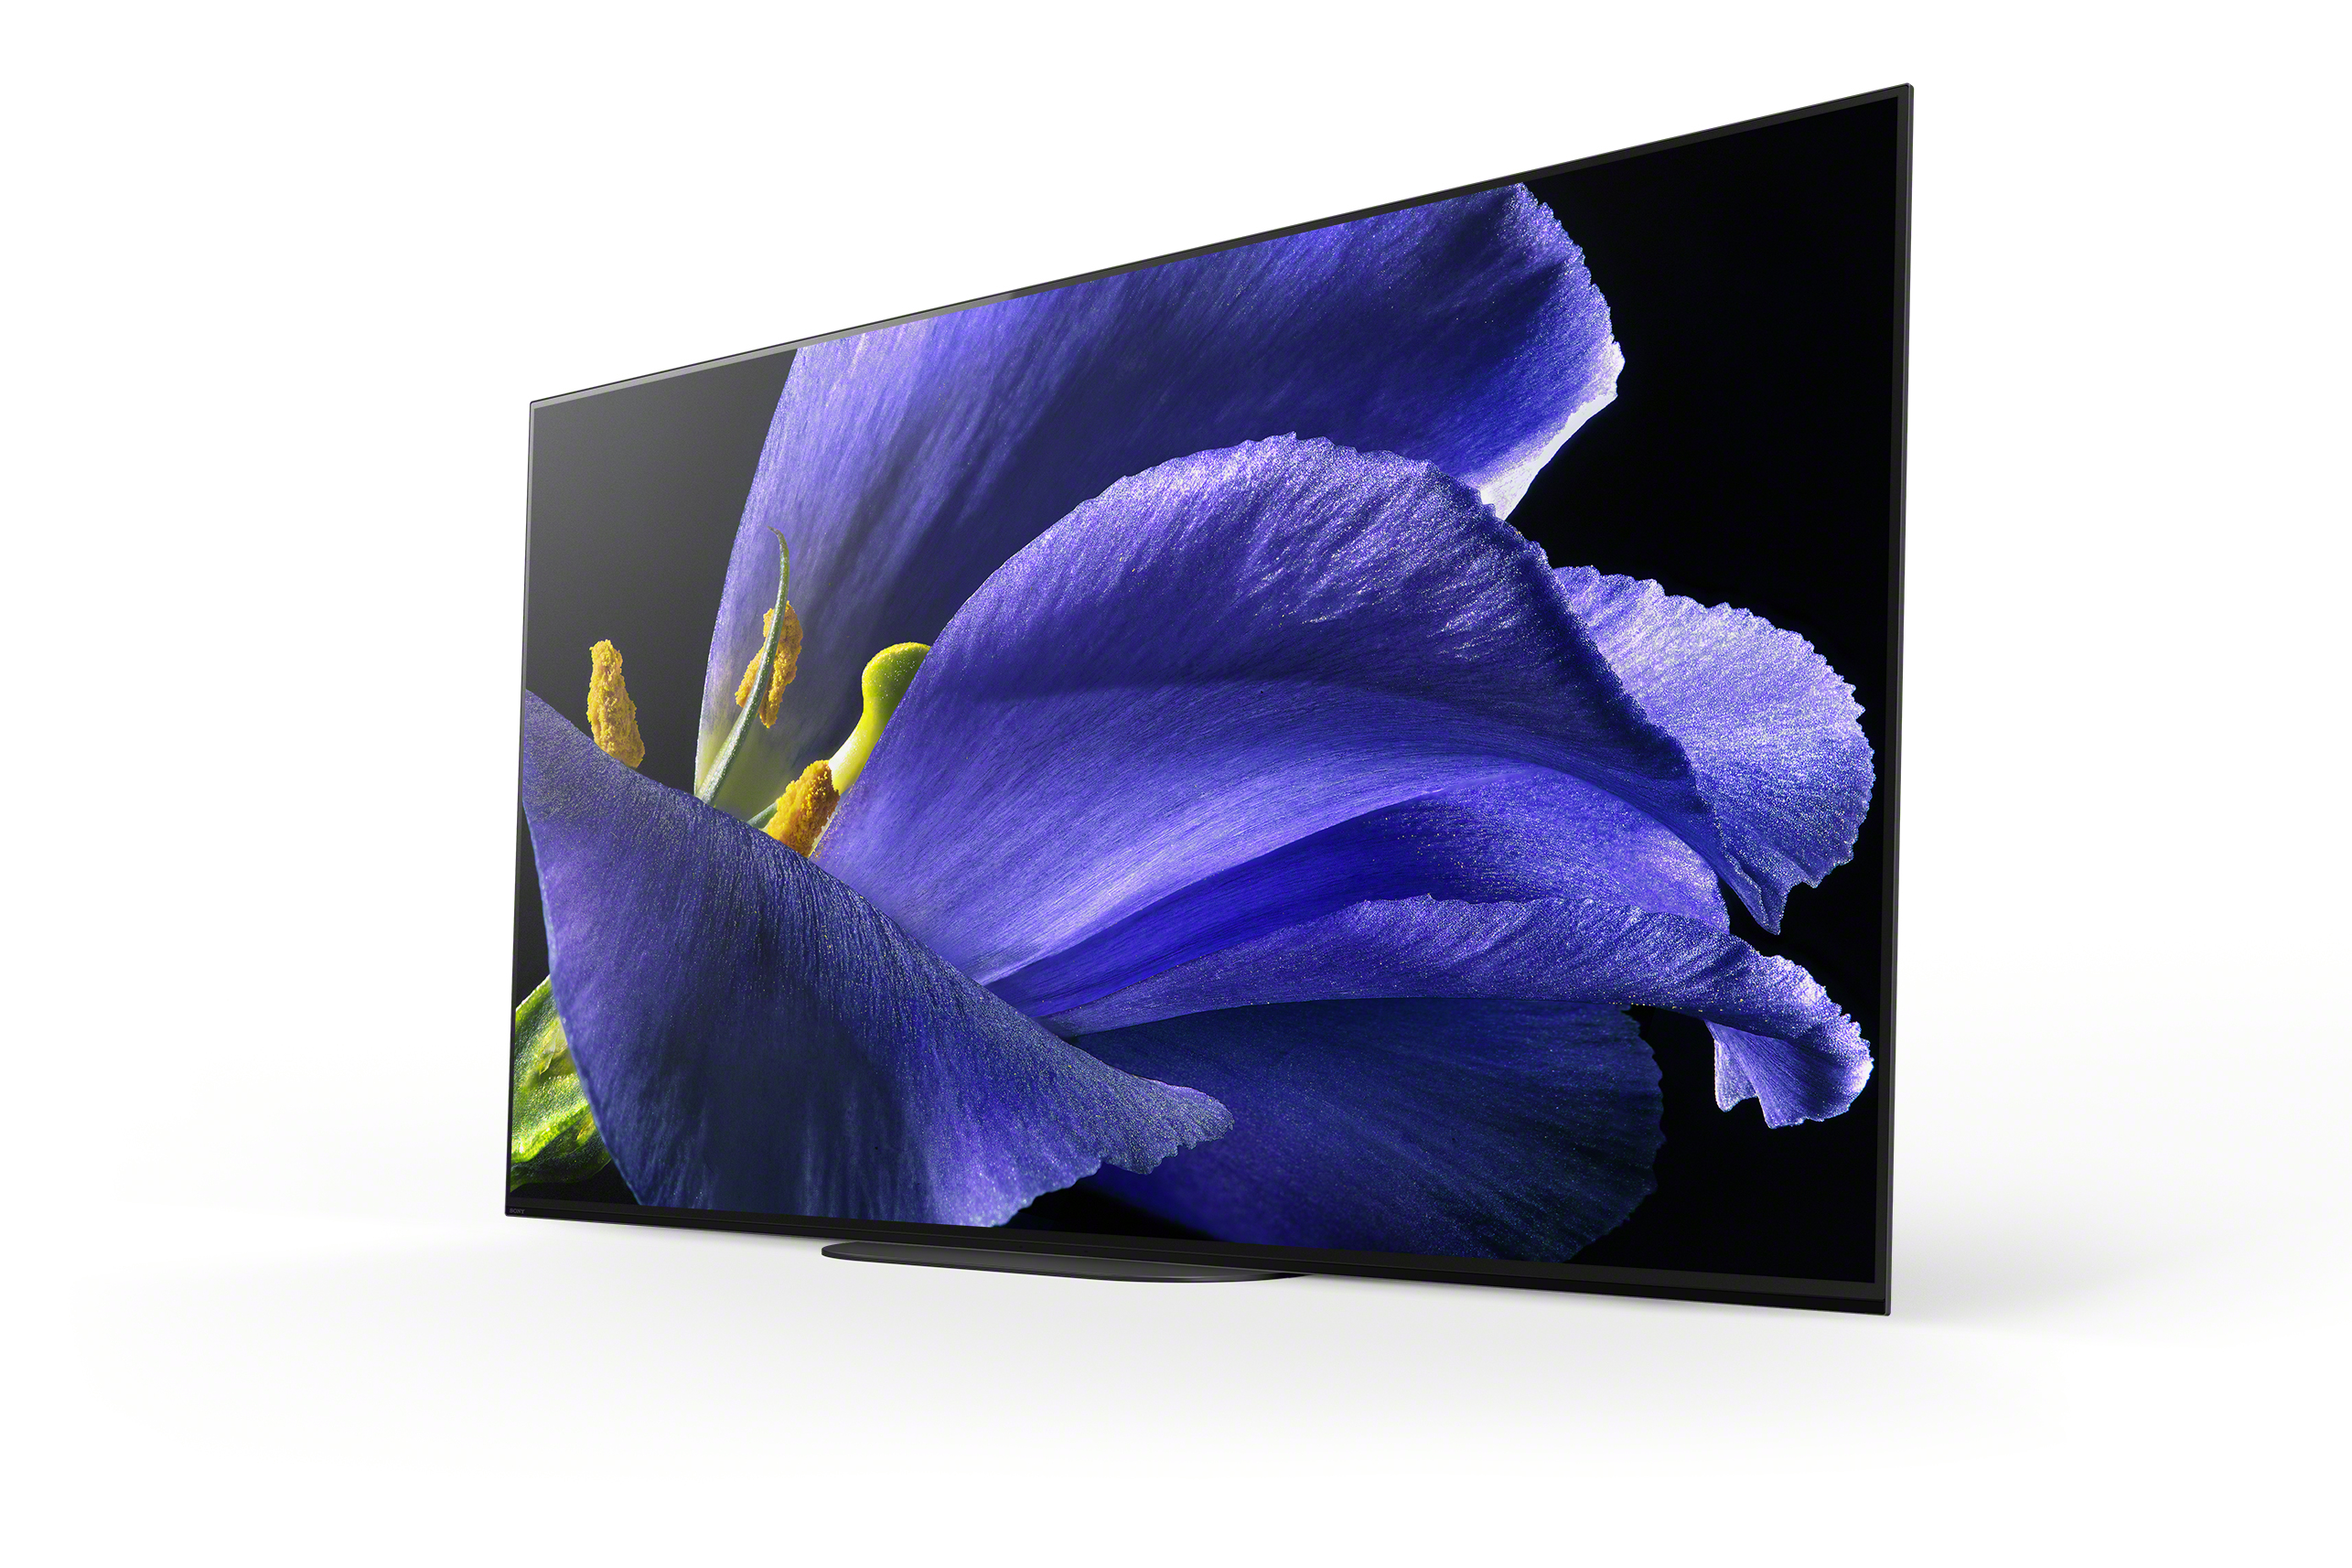 Sony 65" Class XBR65A9G 4K UHD OLED Android Smart TV HDR BRAVIA A9G Series - image 3 of 15